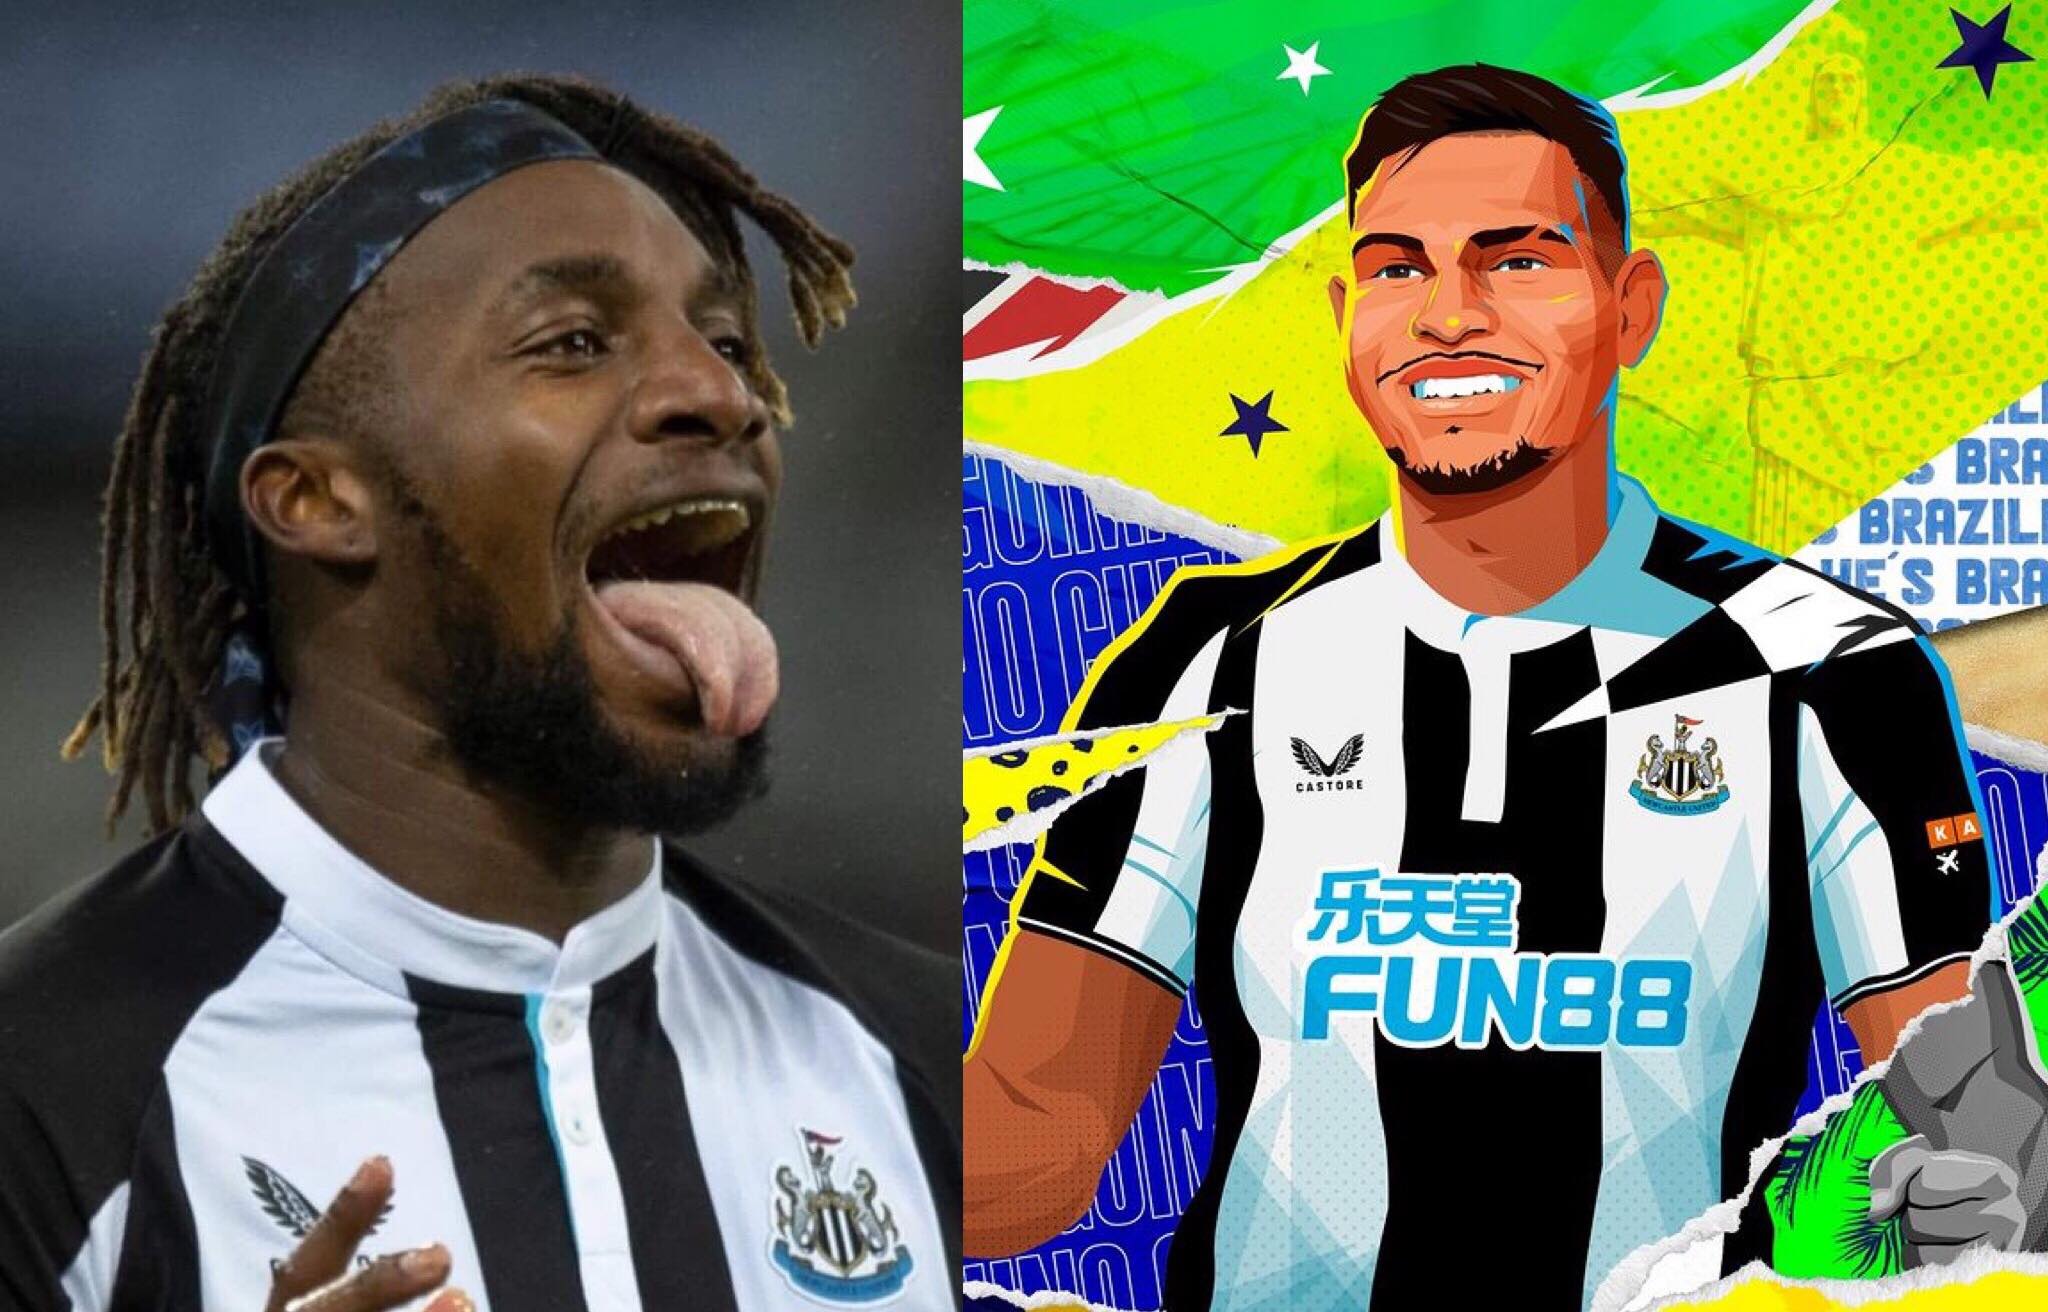  Saint-Maximin reacts to Bruno Guimaraes’ arrival at NUFC – Six words that say it all…